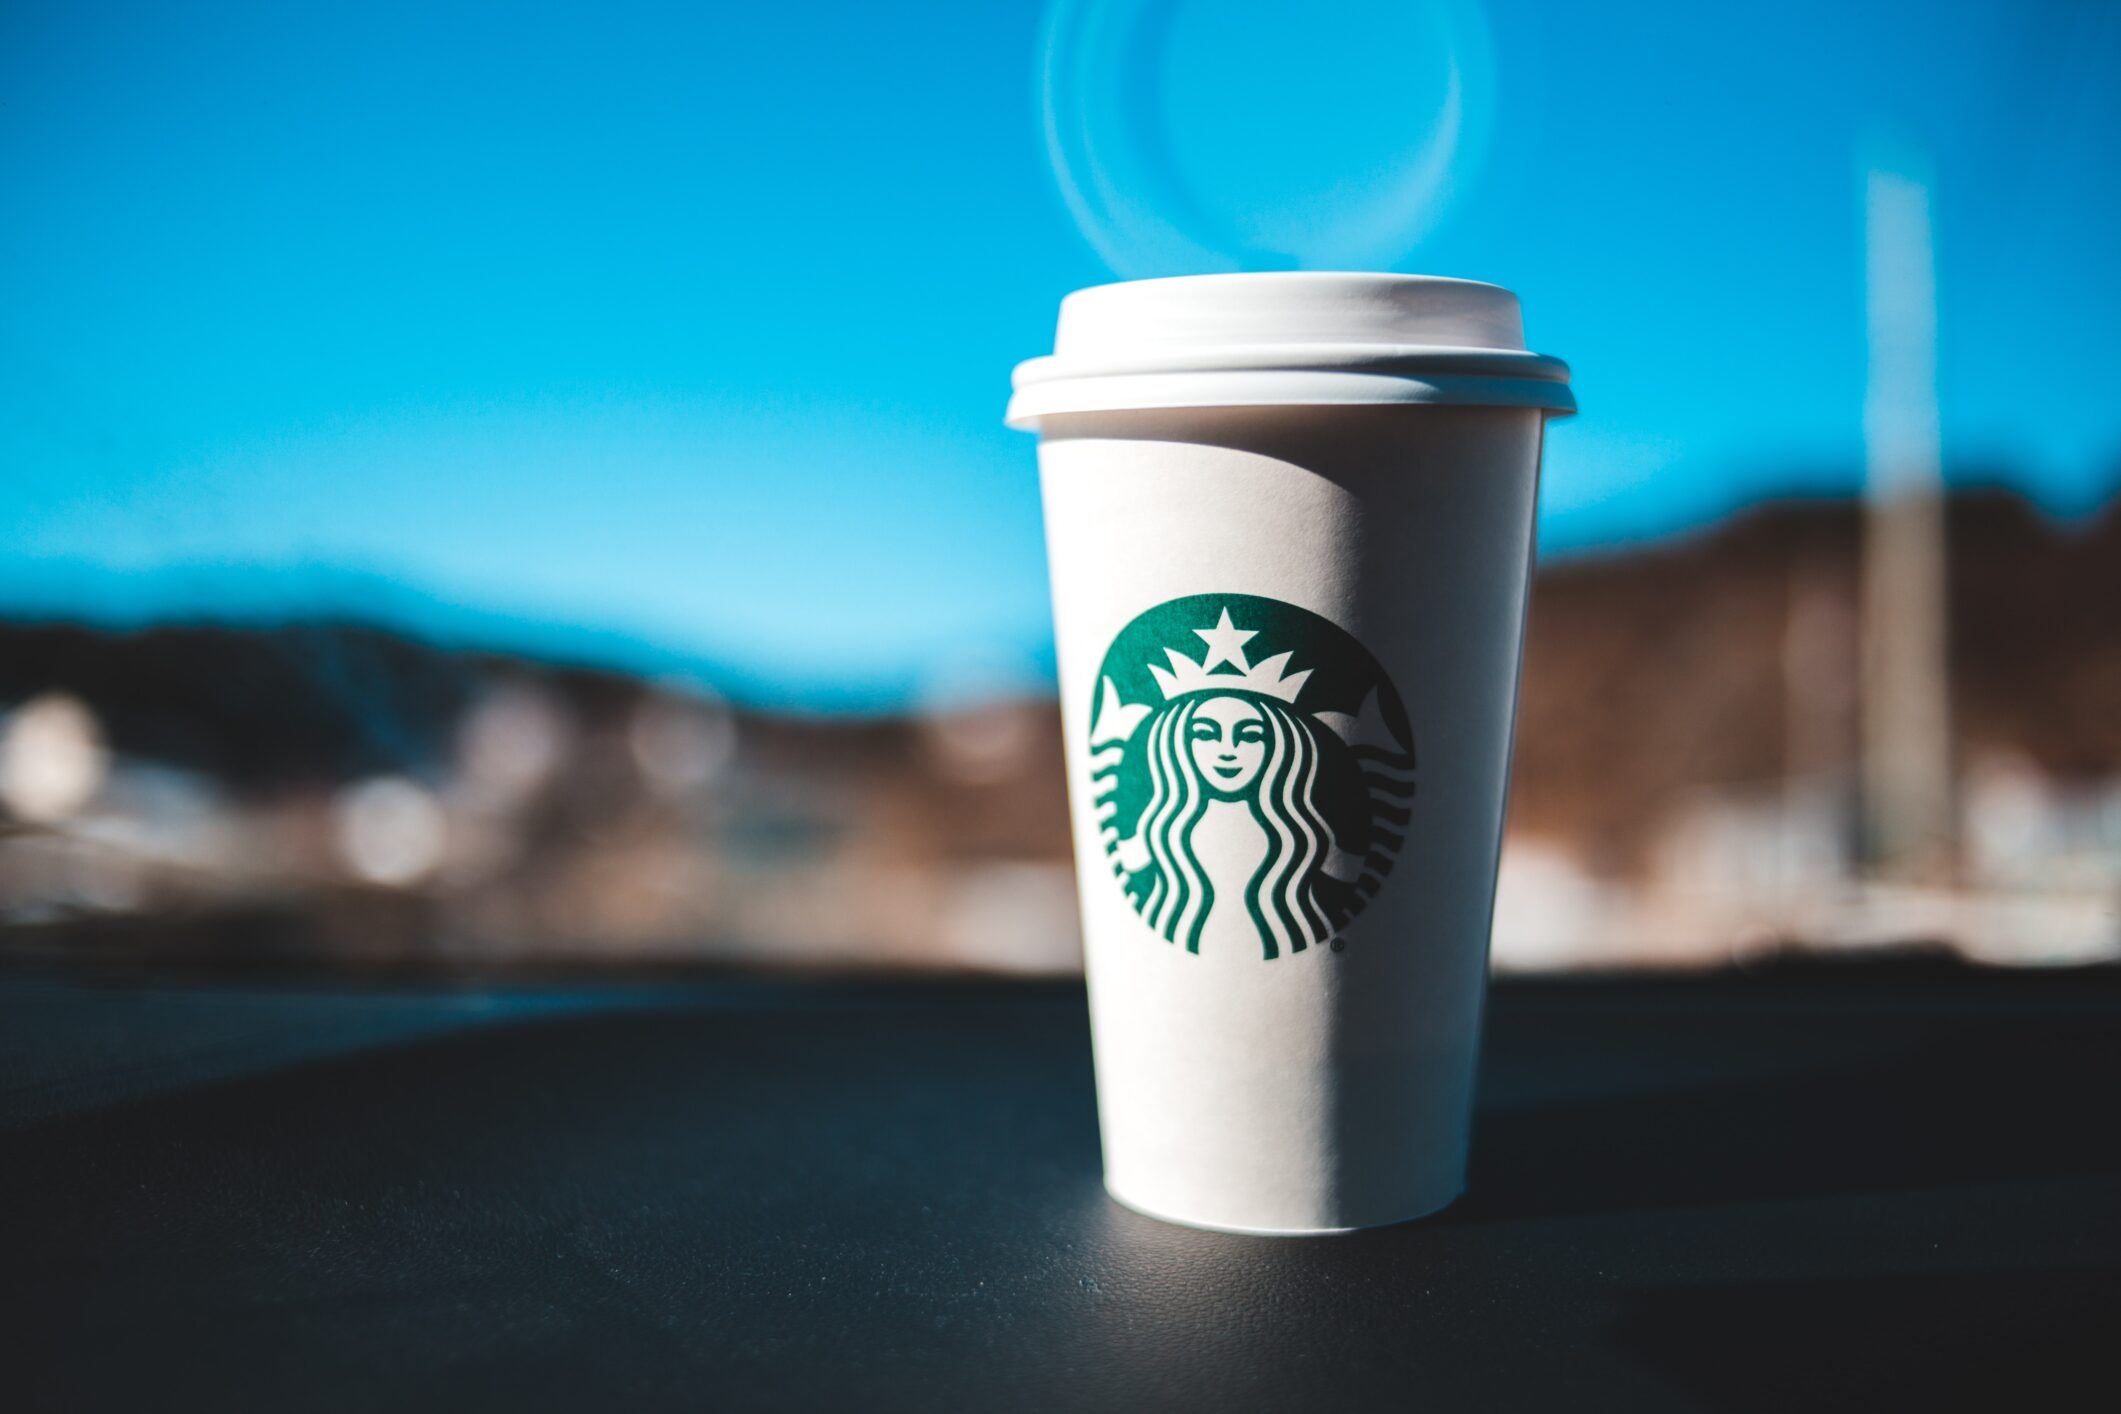 Starbucks is a major contributor to cup waste globally, but is trying to find solutions through its funding of the NextGen Consortium.